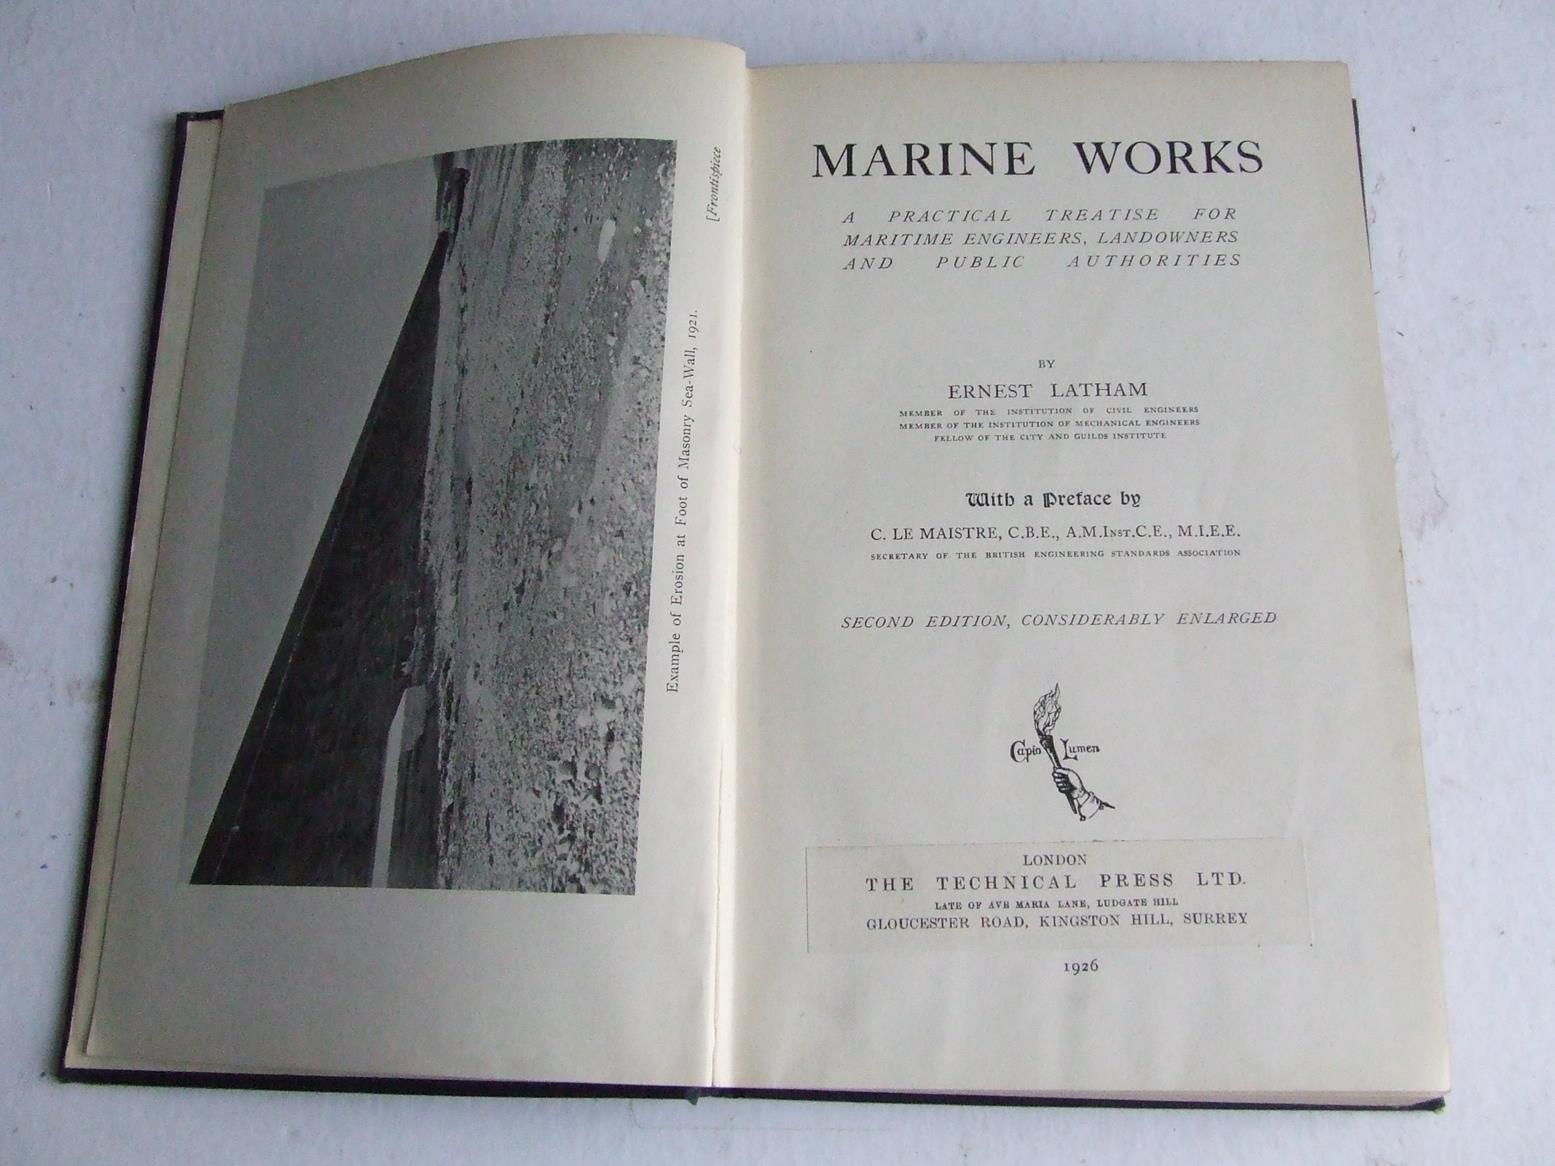 Marine Works. a practical treatise for maritime engineers, landowners and public authorities